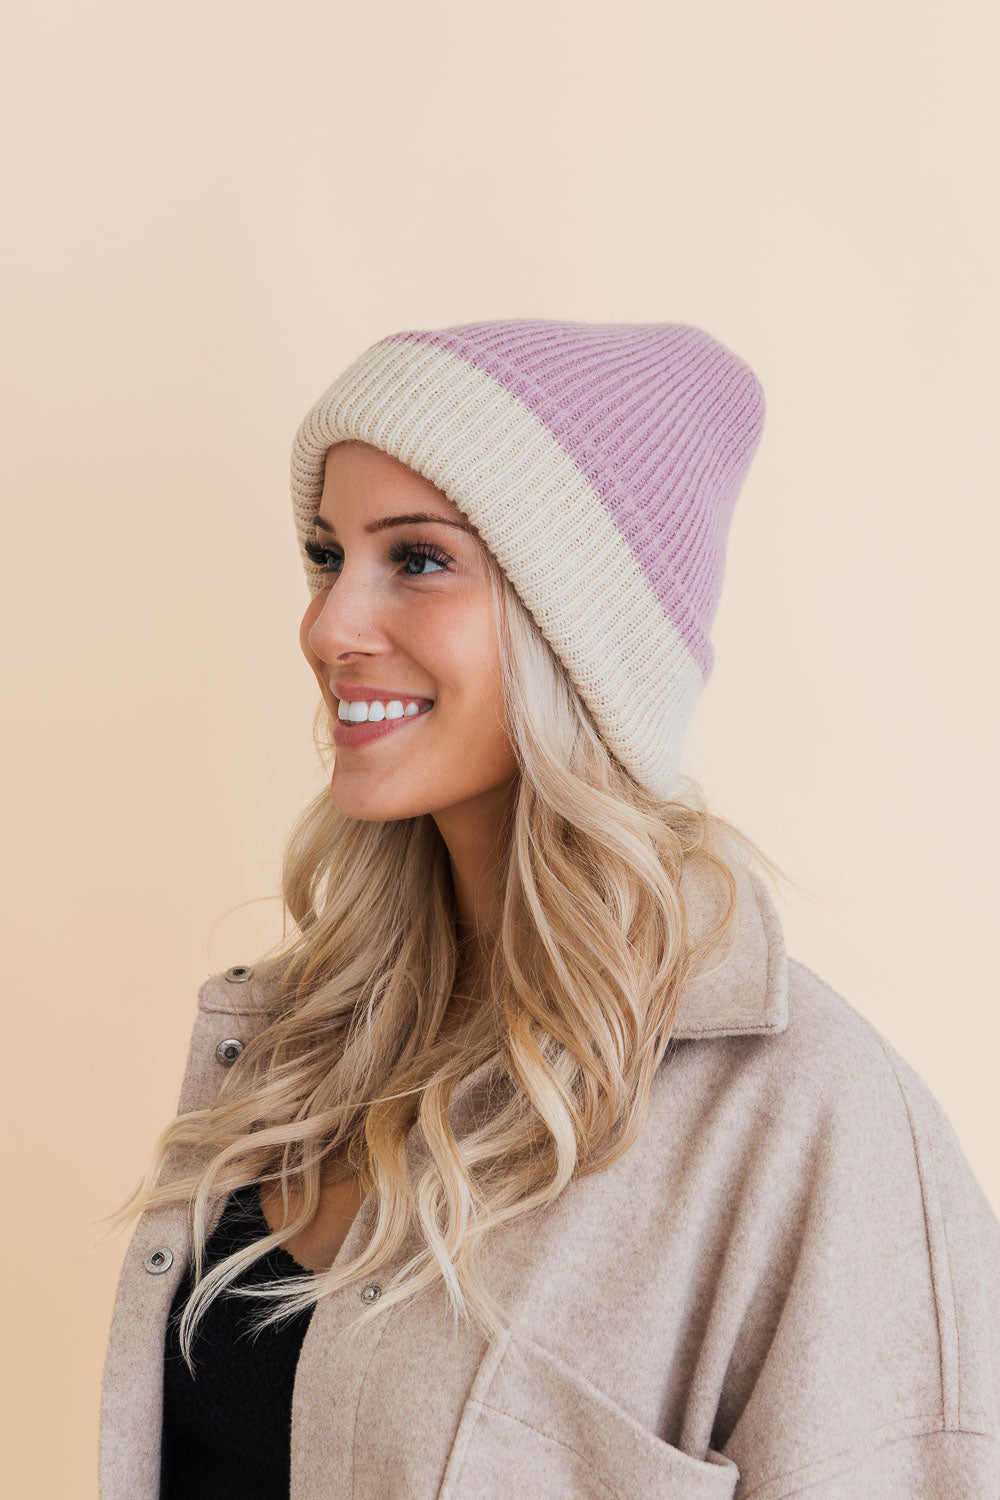 The Two-Tone Knit Beanie – Eastern Apparel